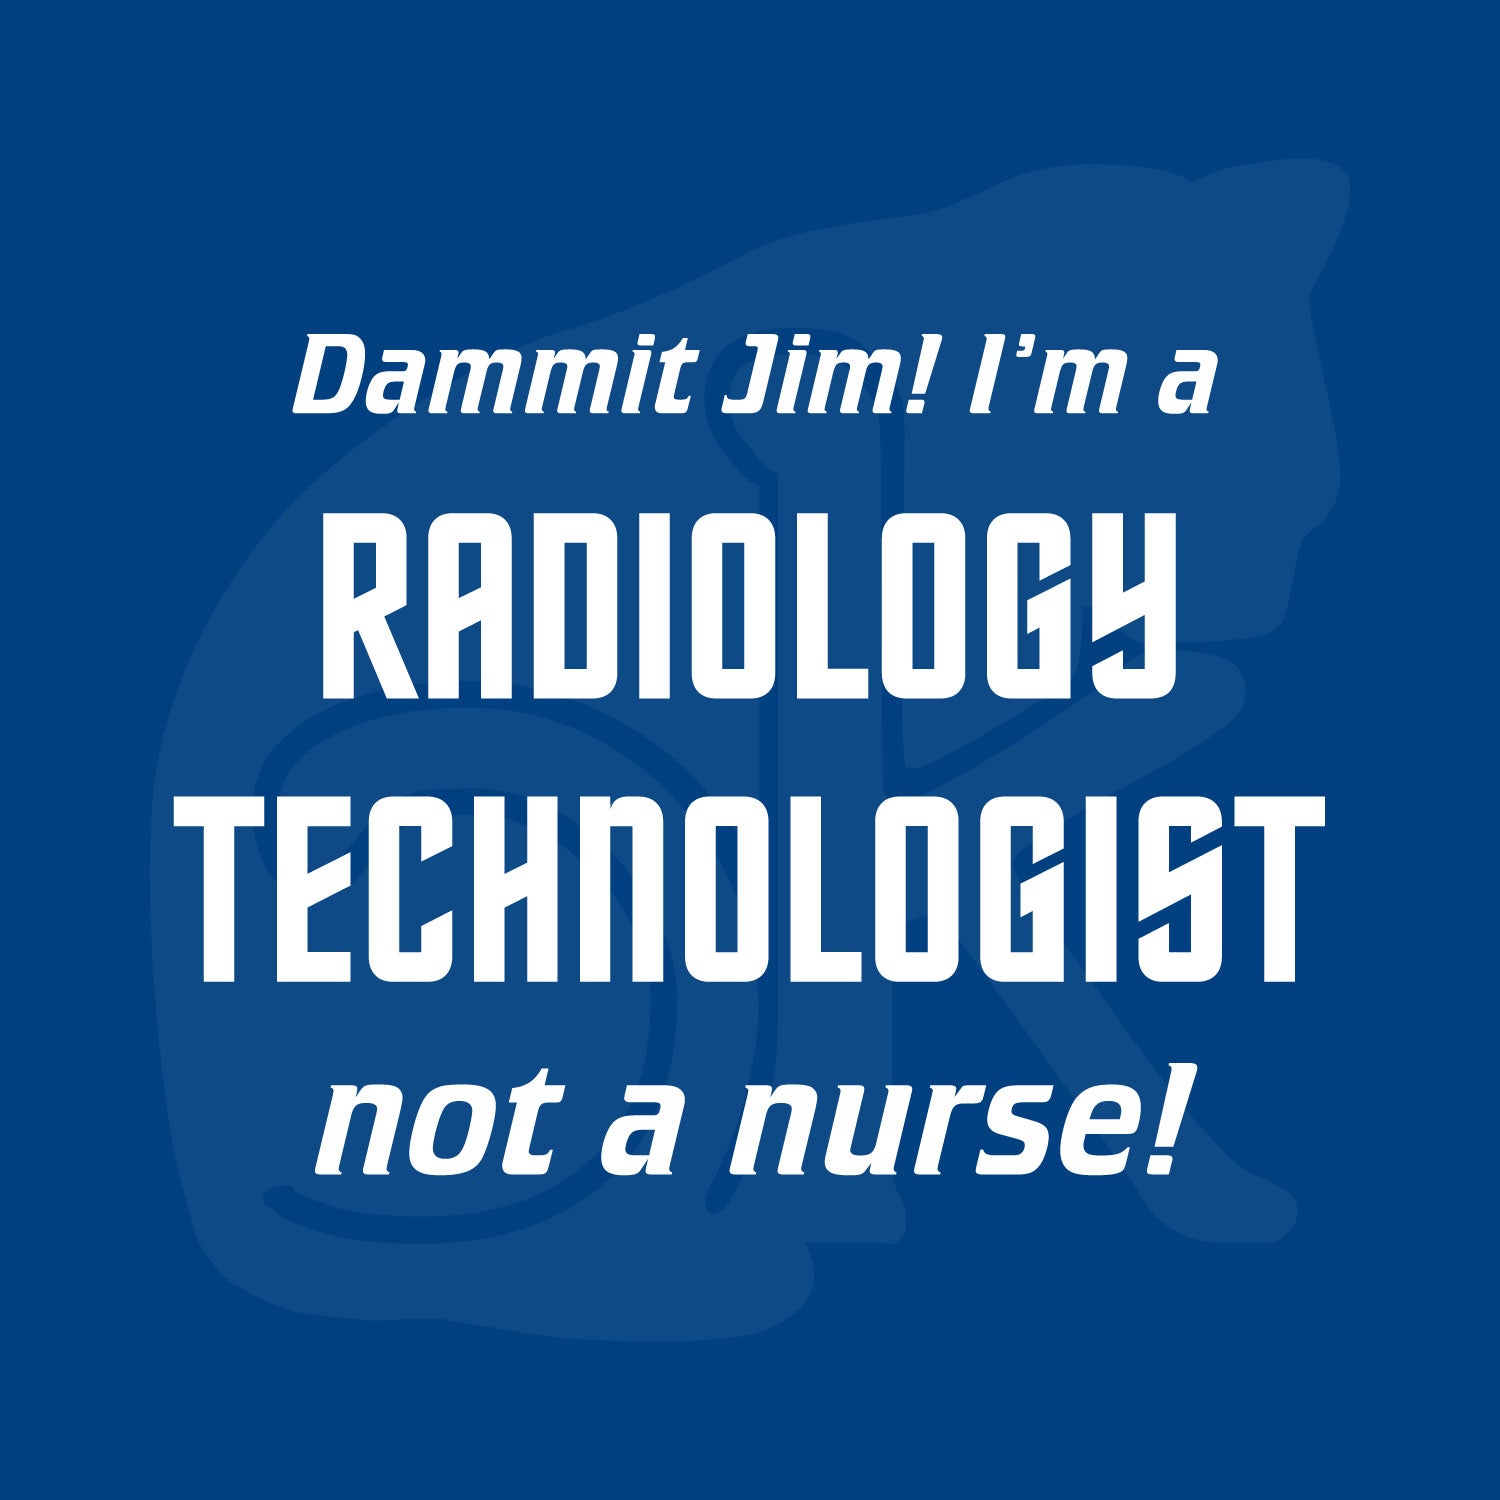 Standalone watermarked graphic in Star Trek font: "Dammit Jim! I'm a RADIOLOGY TECHNOLOGIST not a nurse!"